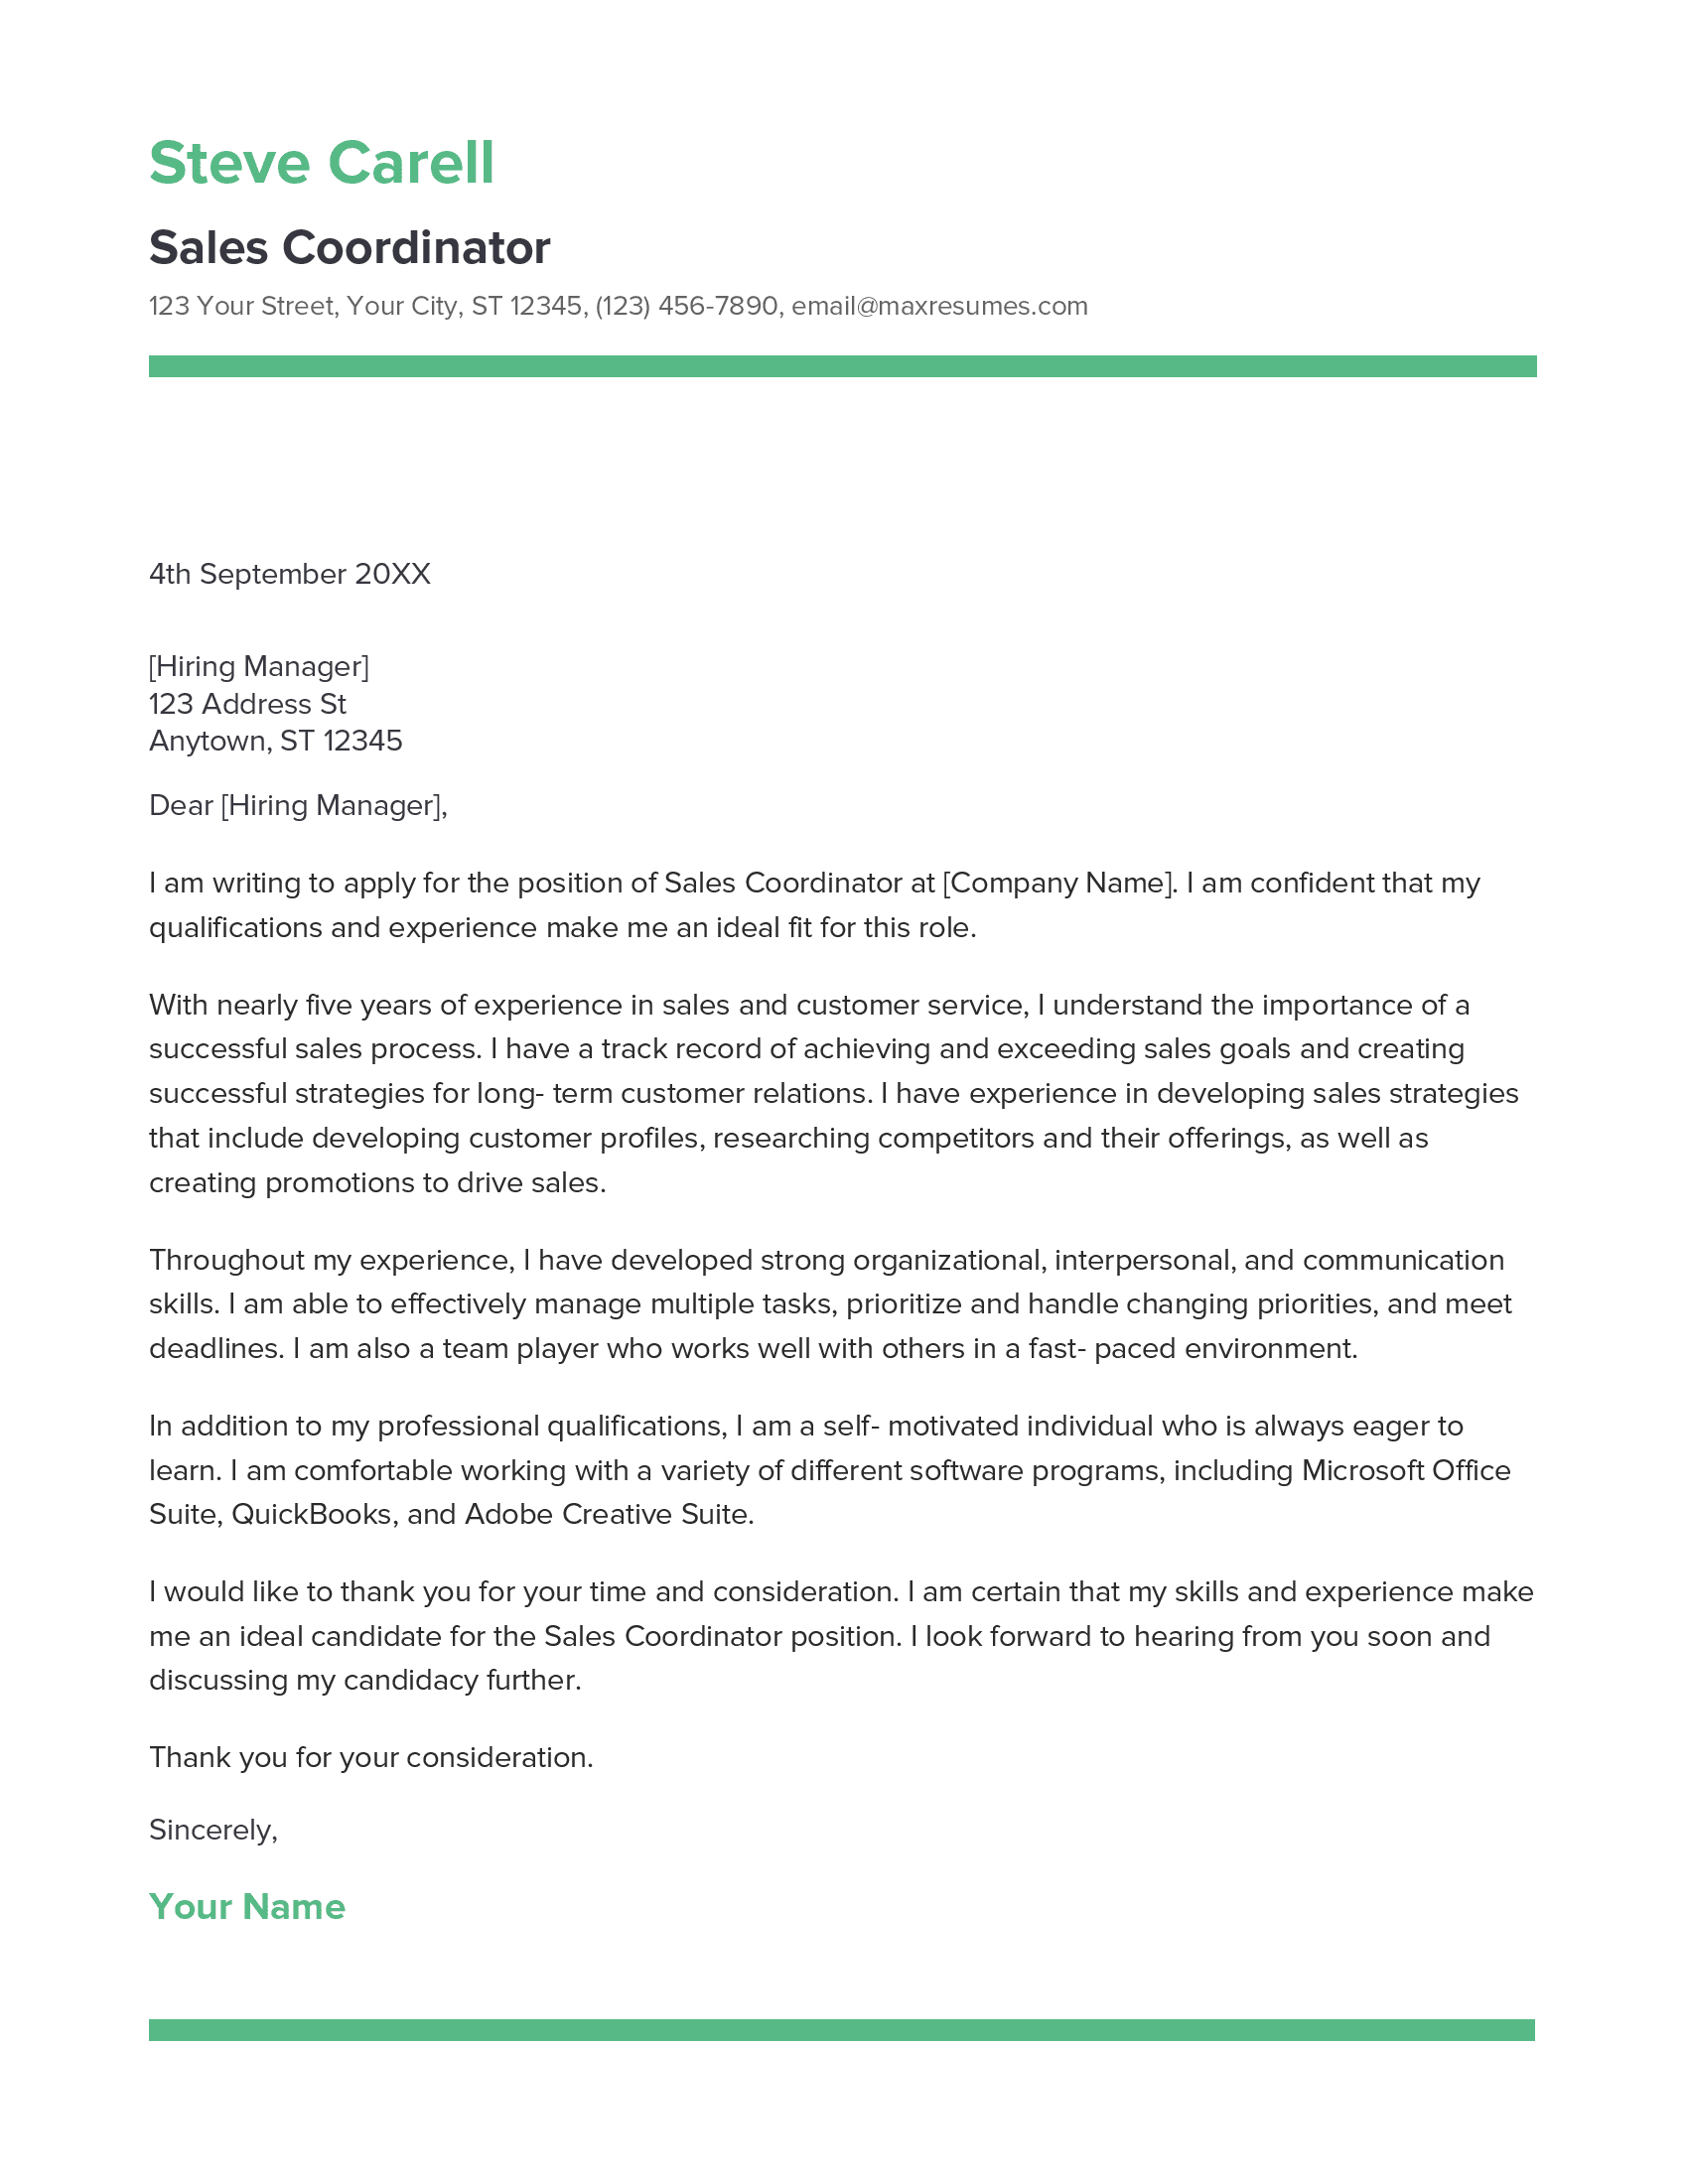 Sales Coordinator Cover Letter Example